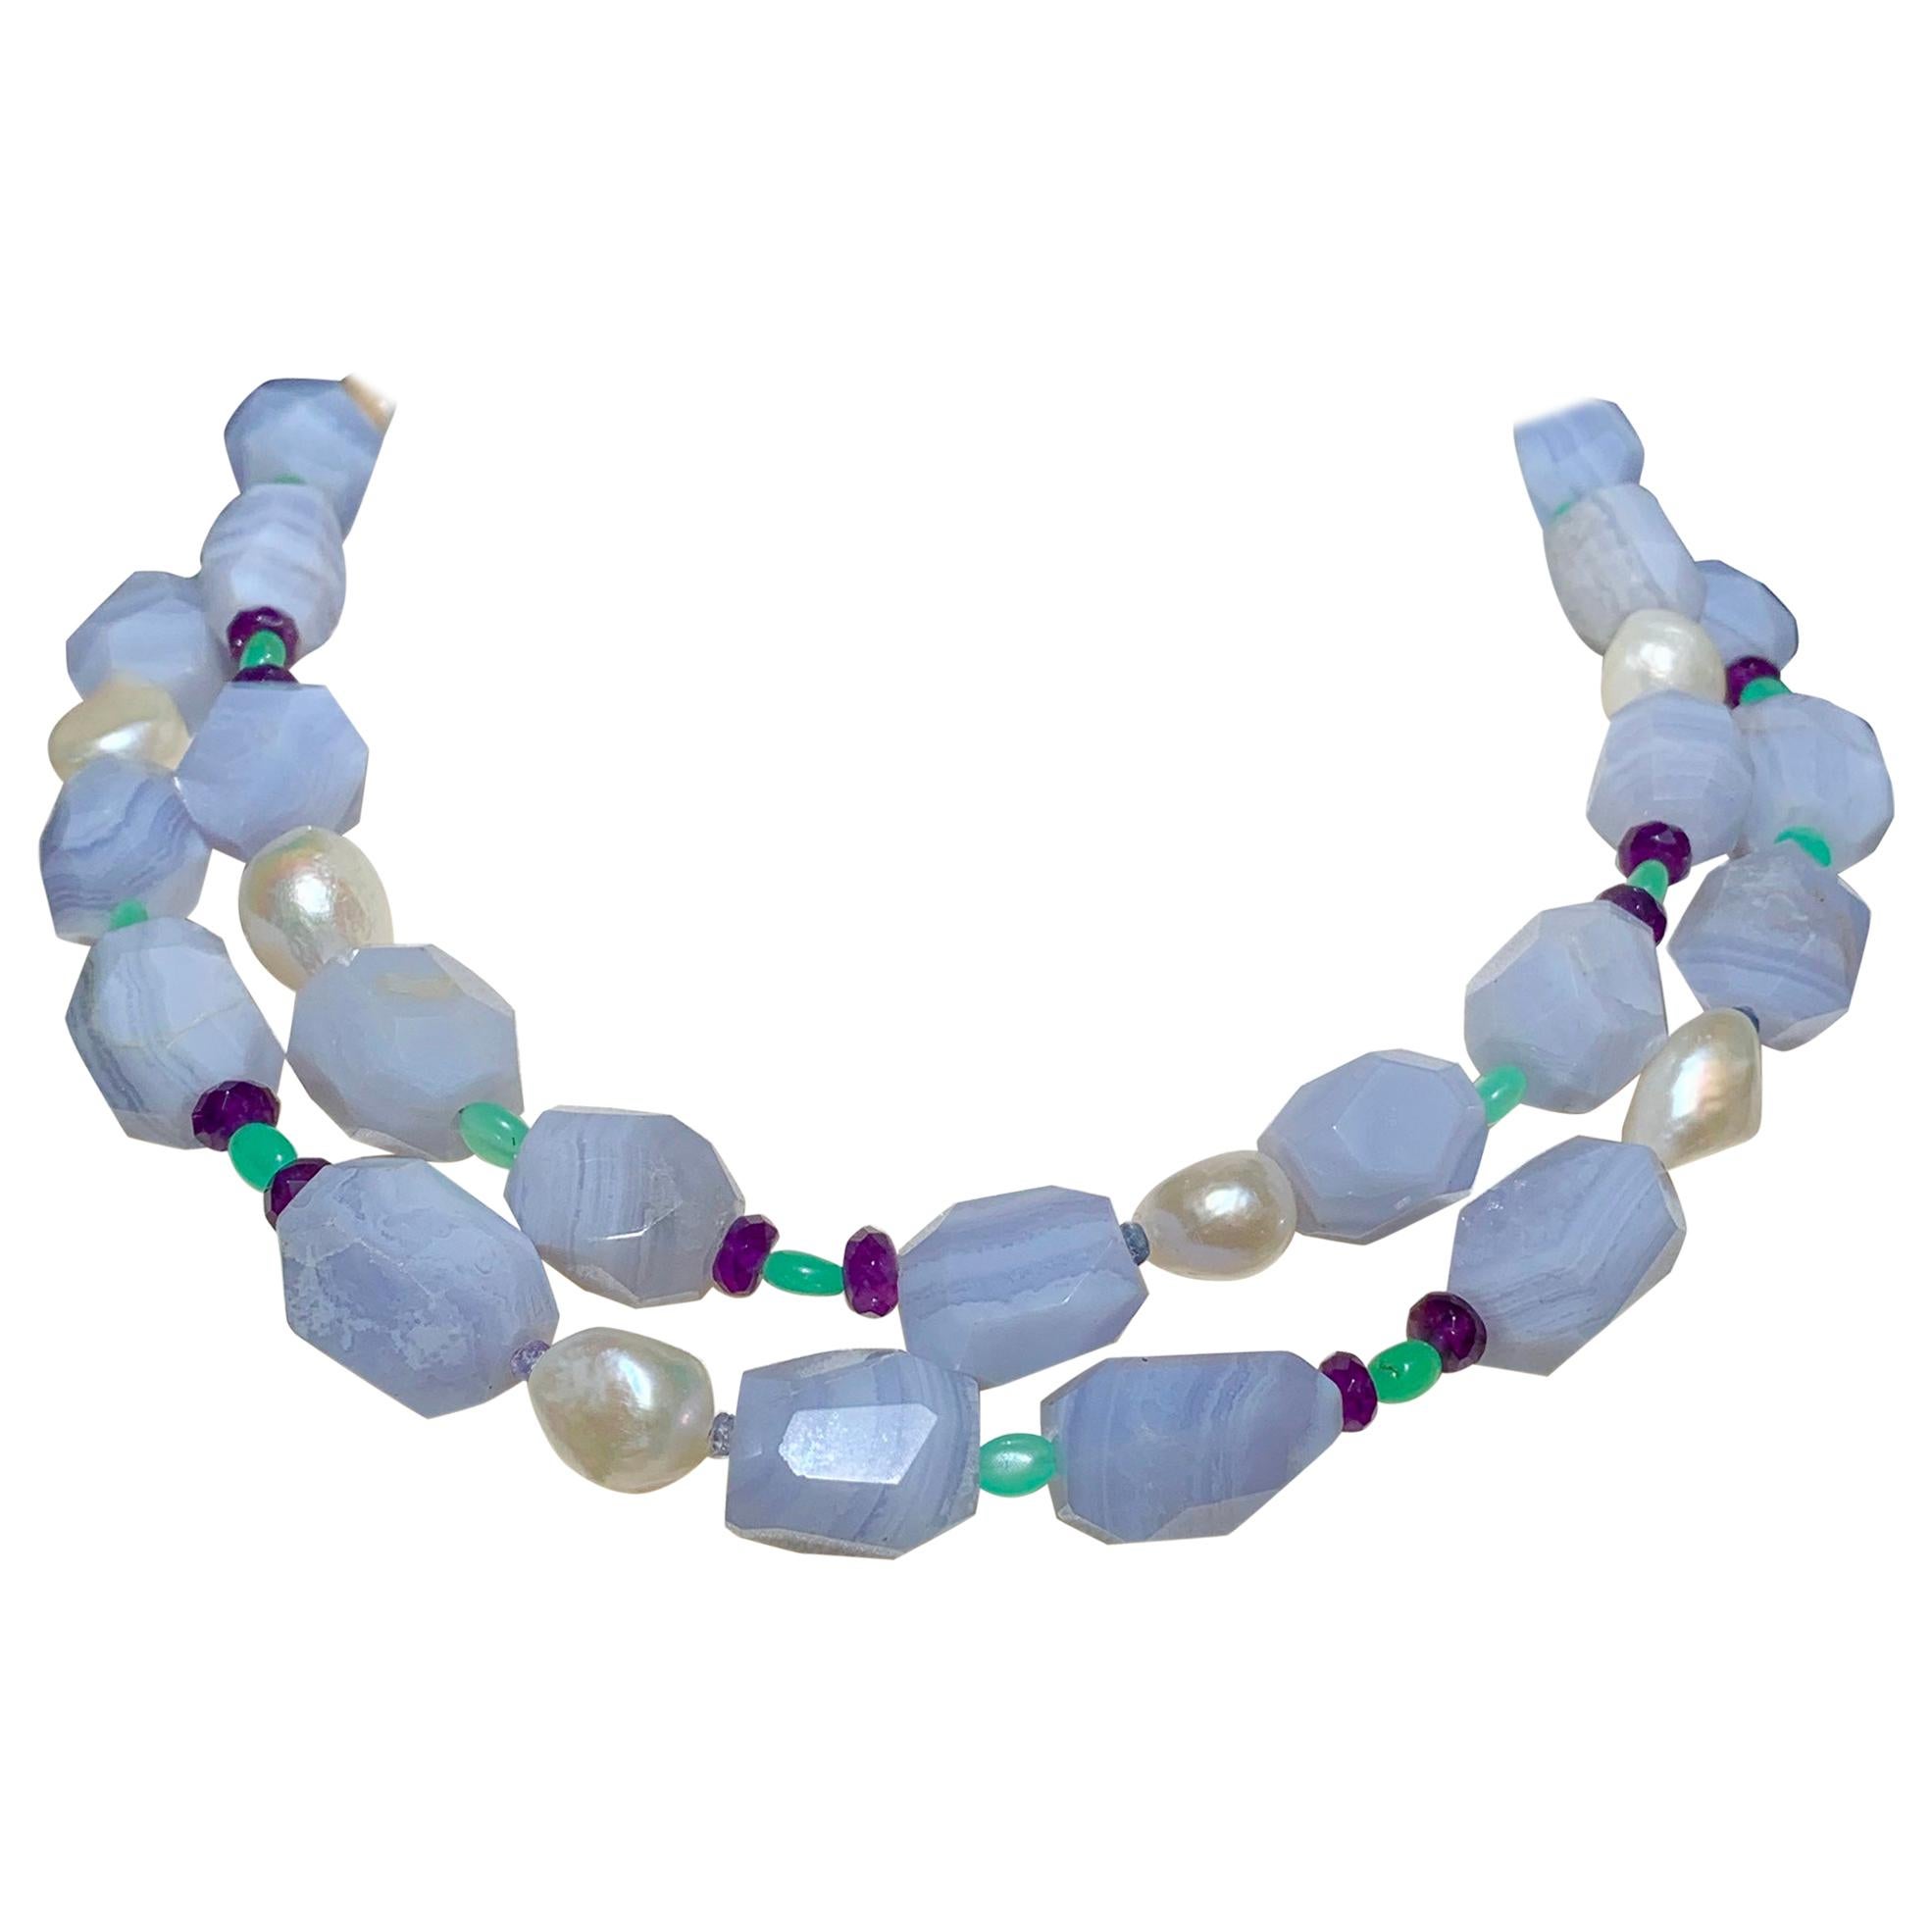 Blue Lace Agate Necklace with Chrysoprase and Amethyst